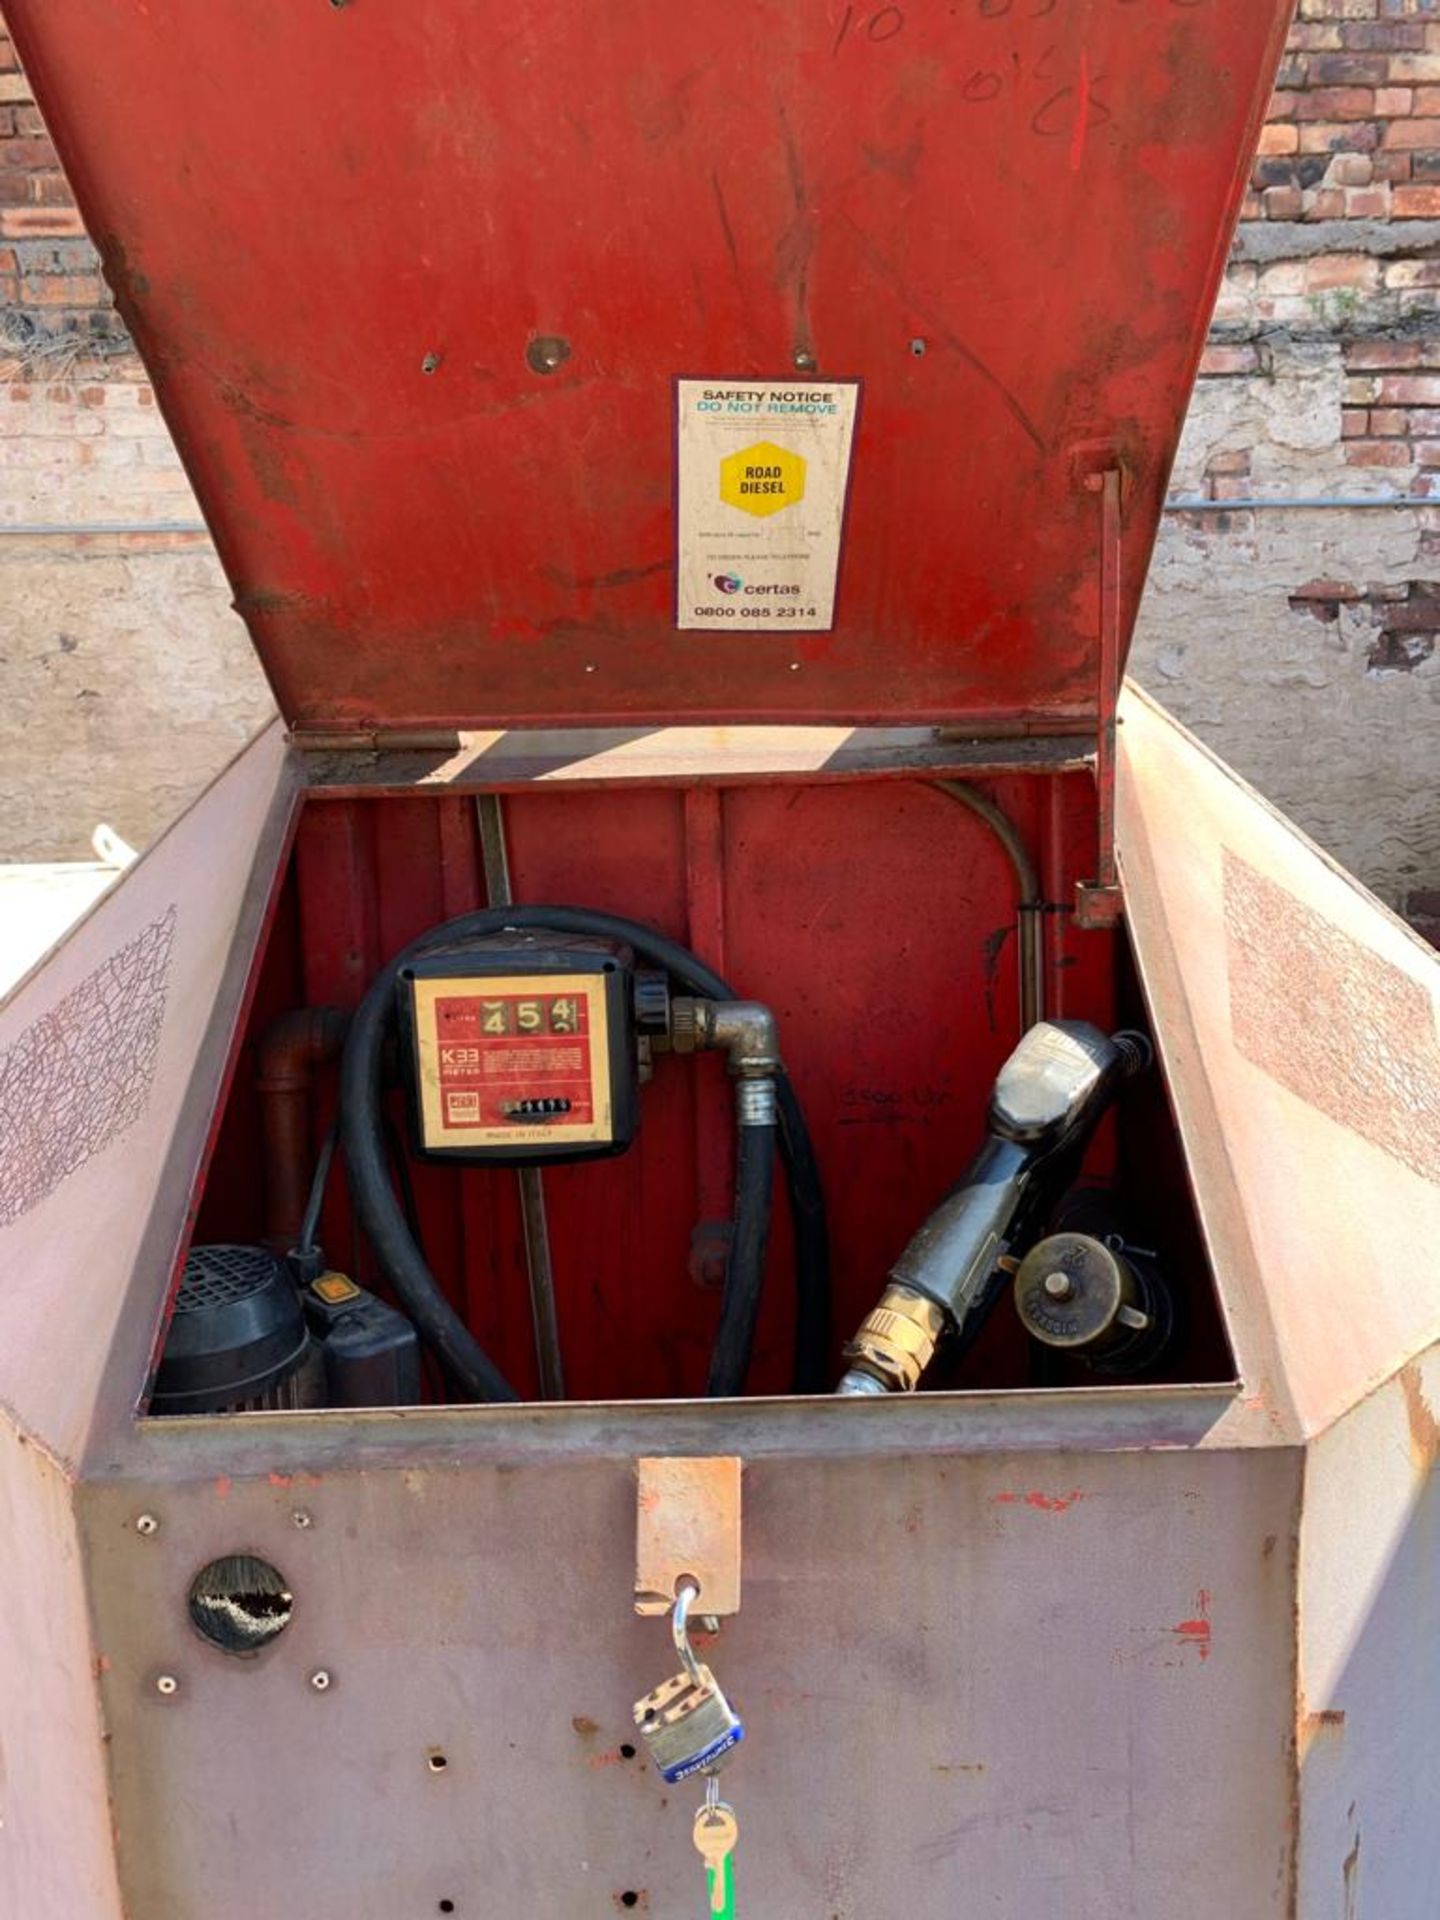 RED BUNDED FUEL TANK WITH FUEL DISPENSER PUMPS AND METERS